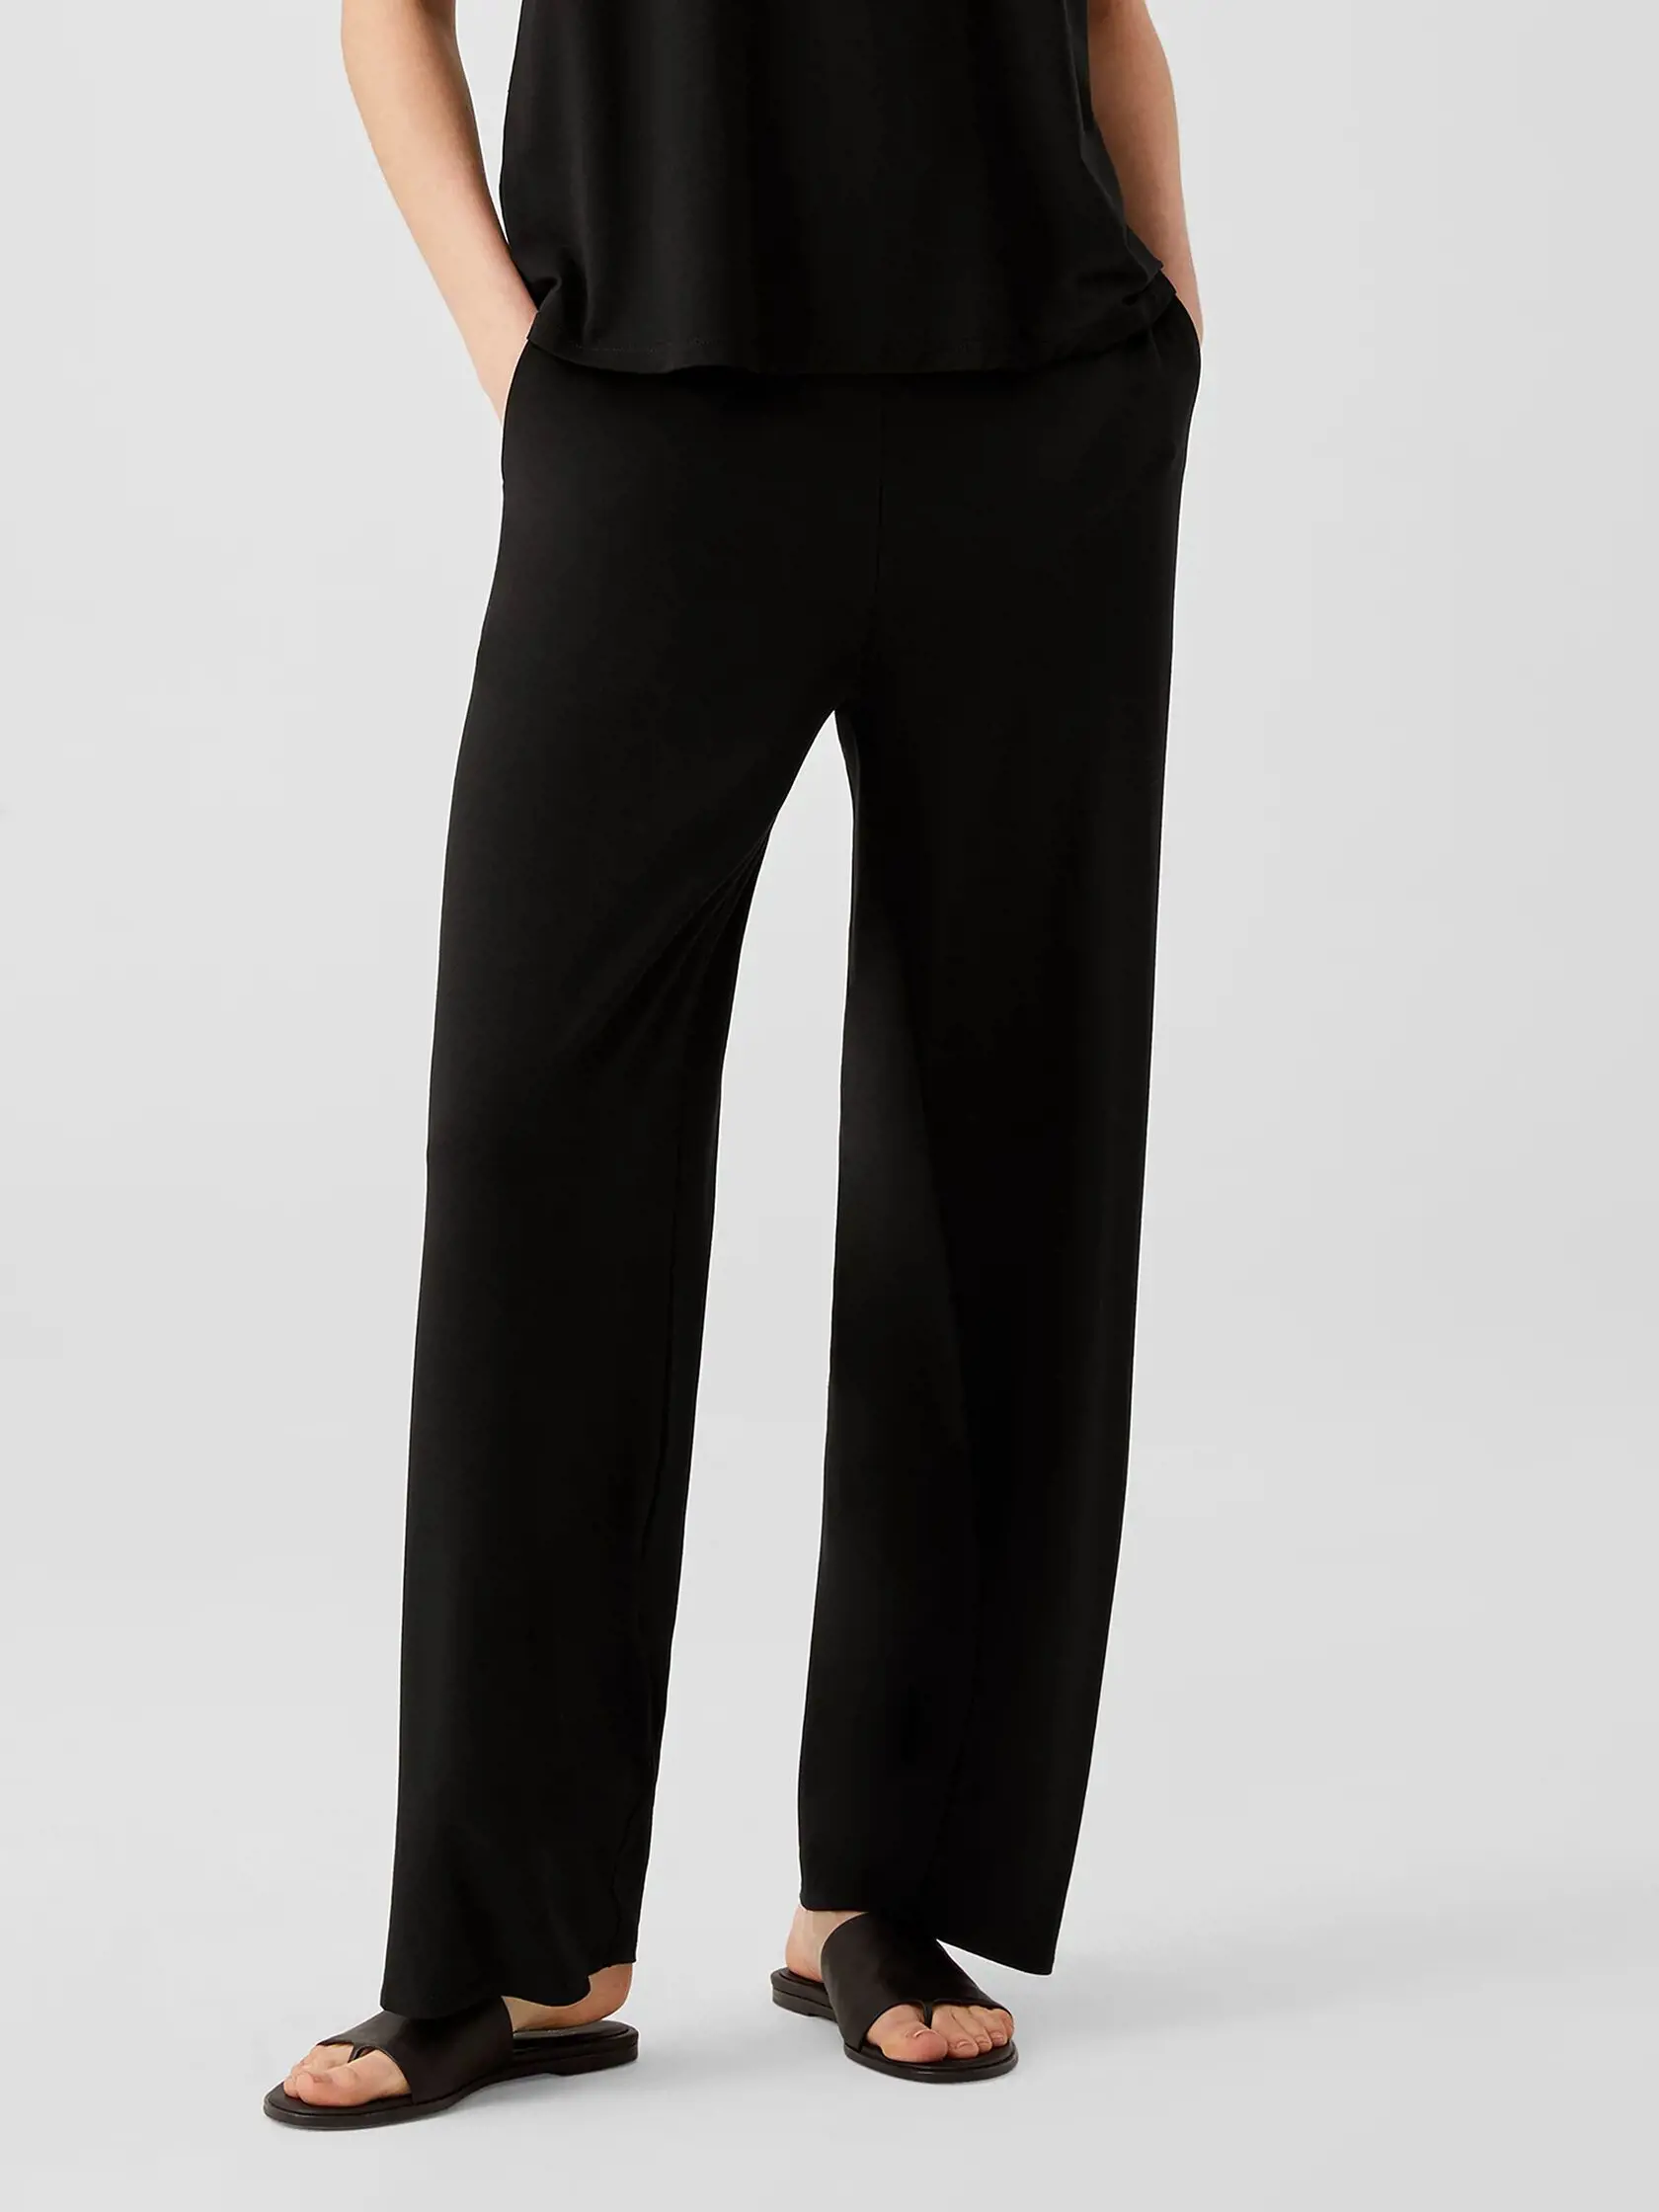 Decoding The Fit: A Guide To Understanding How Eileen Fisher Pants ...